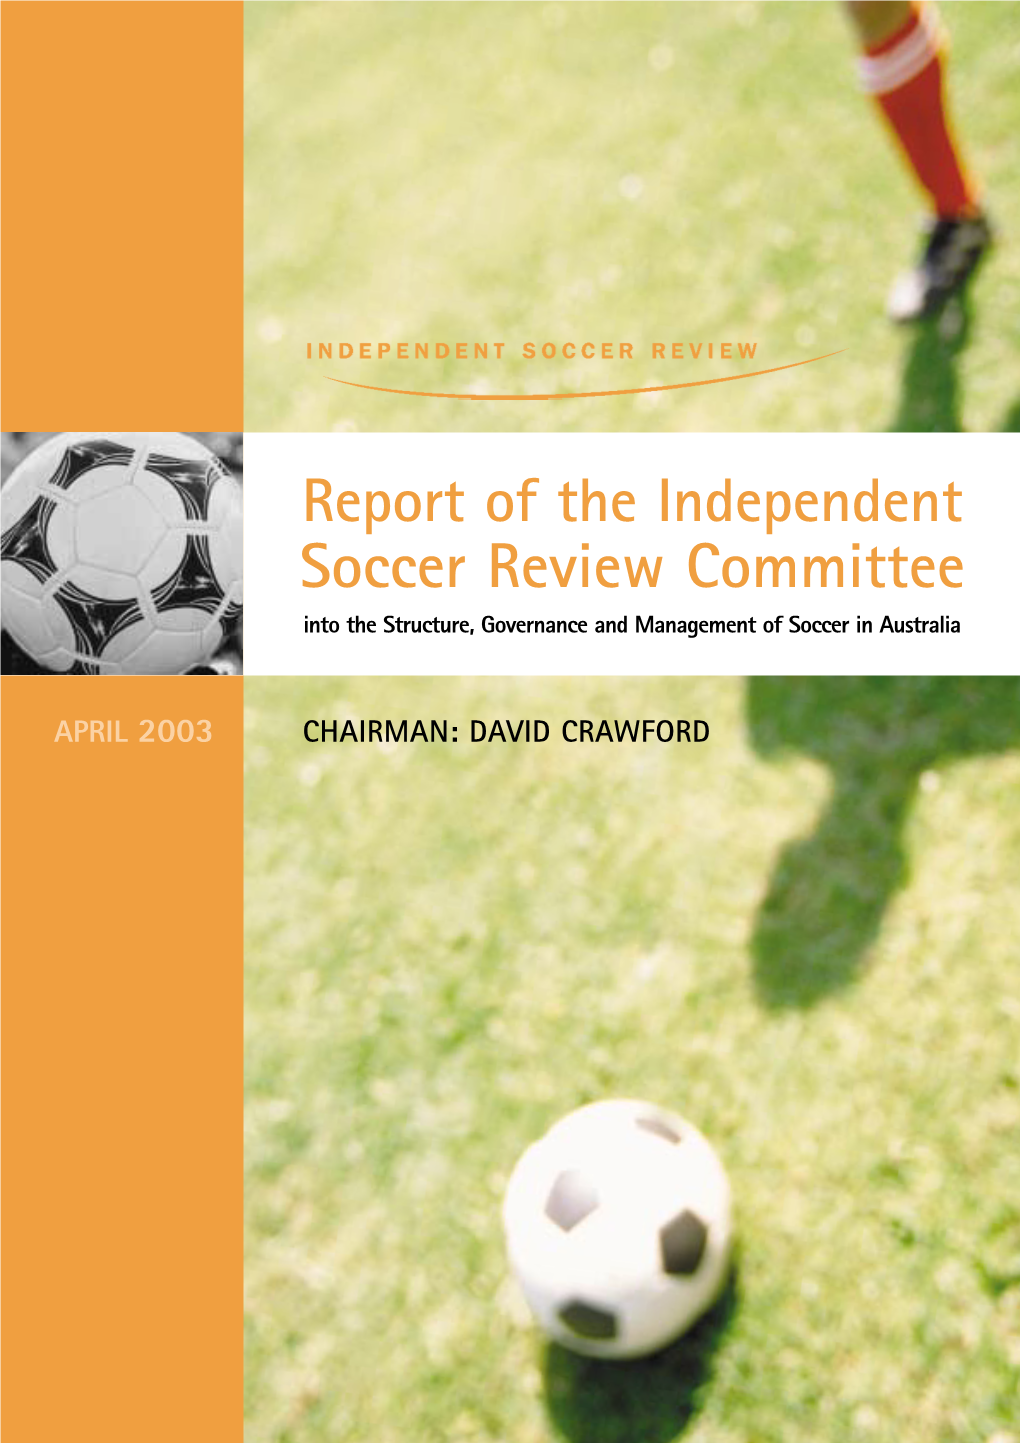 Soccer Review Committee Into the Structure, Governance and Management of Soccer in Australia